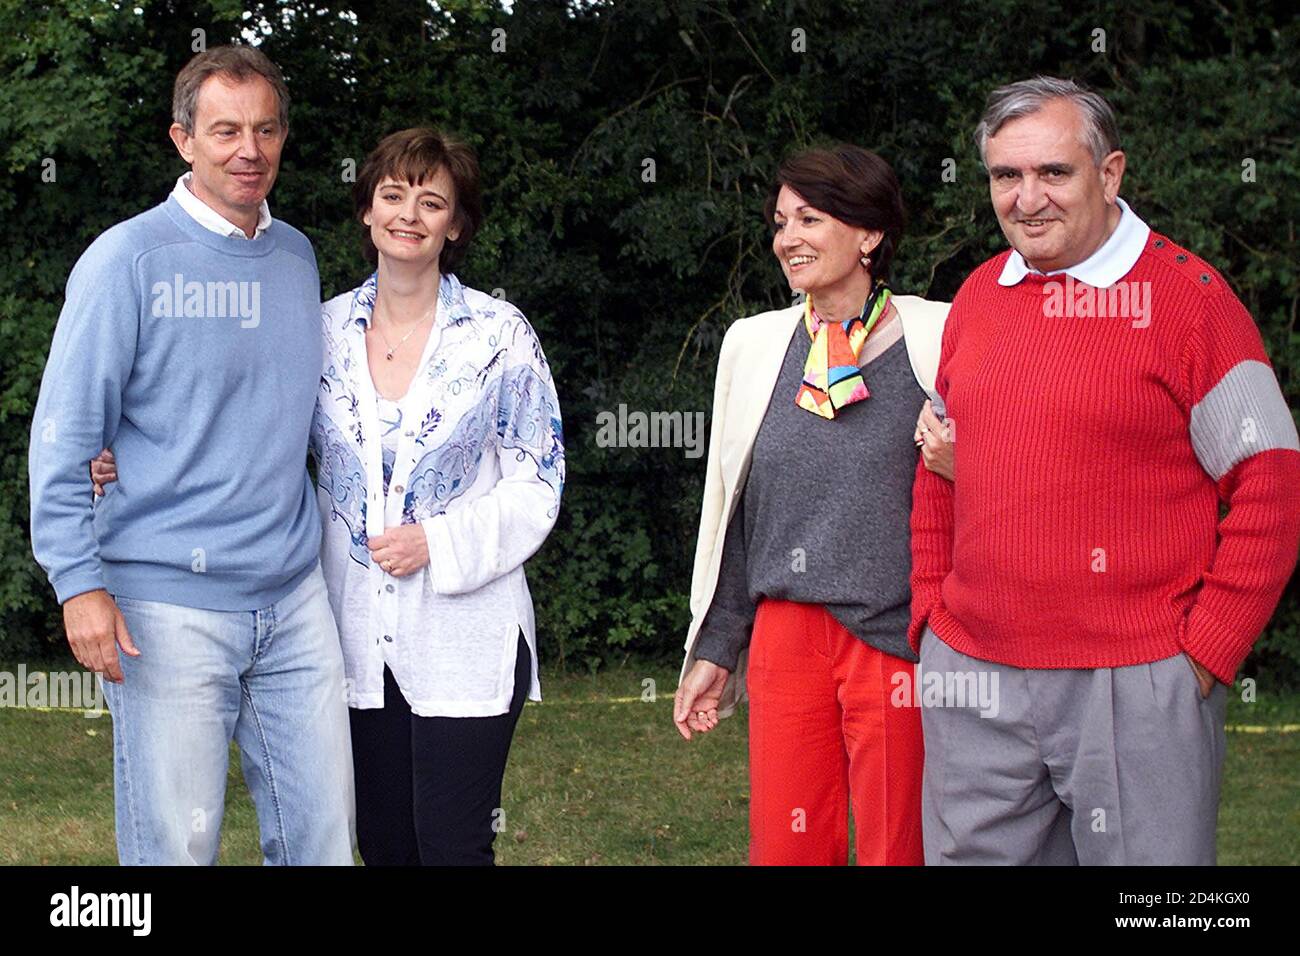 British prime Minister Tony Blair (L) and his wife Cherie pose with French prime Minister Jean-Pierre Raffarin (R) and his wife Anne-Marie during a private meeting in castle of 'Lagrezette' in Caillac, southwestern France, August 12, 2002. Blair is currently on holiday in the area. Stock Photo